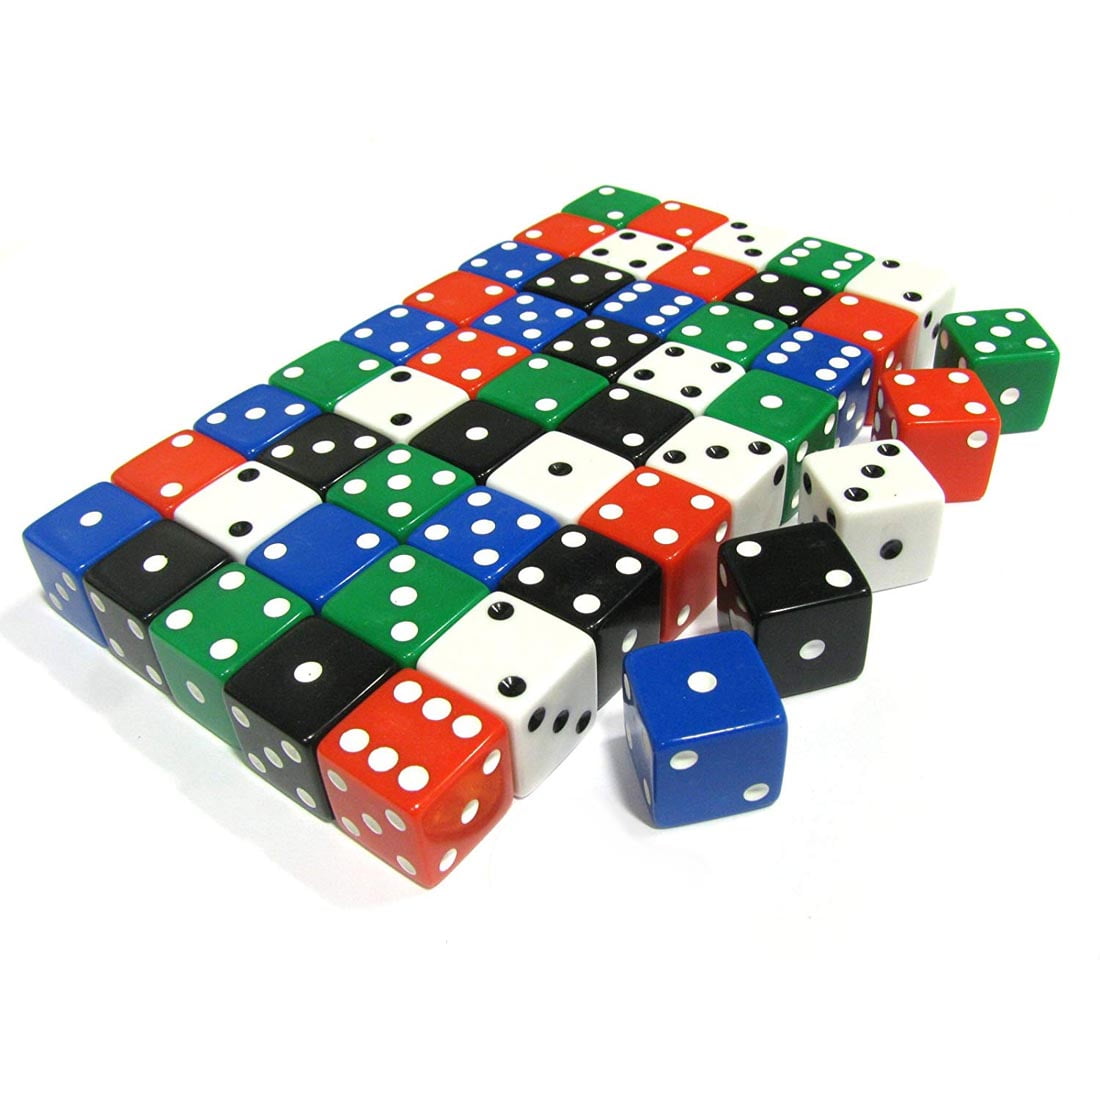 & Minutes Koplow's Nighttime *TIME DICE*- 2 OP White w/Hours Blue Red 